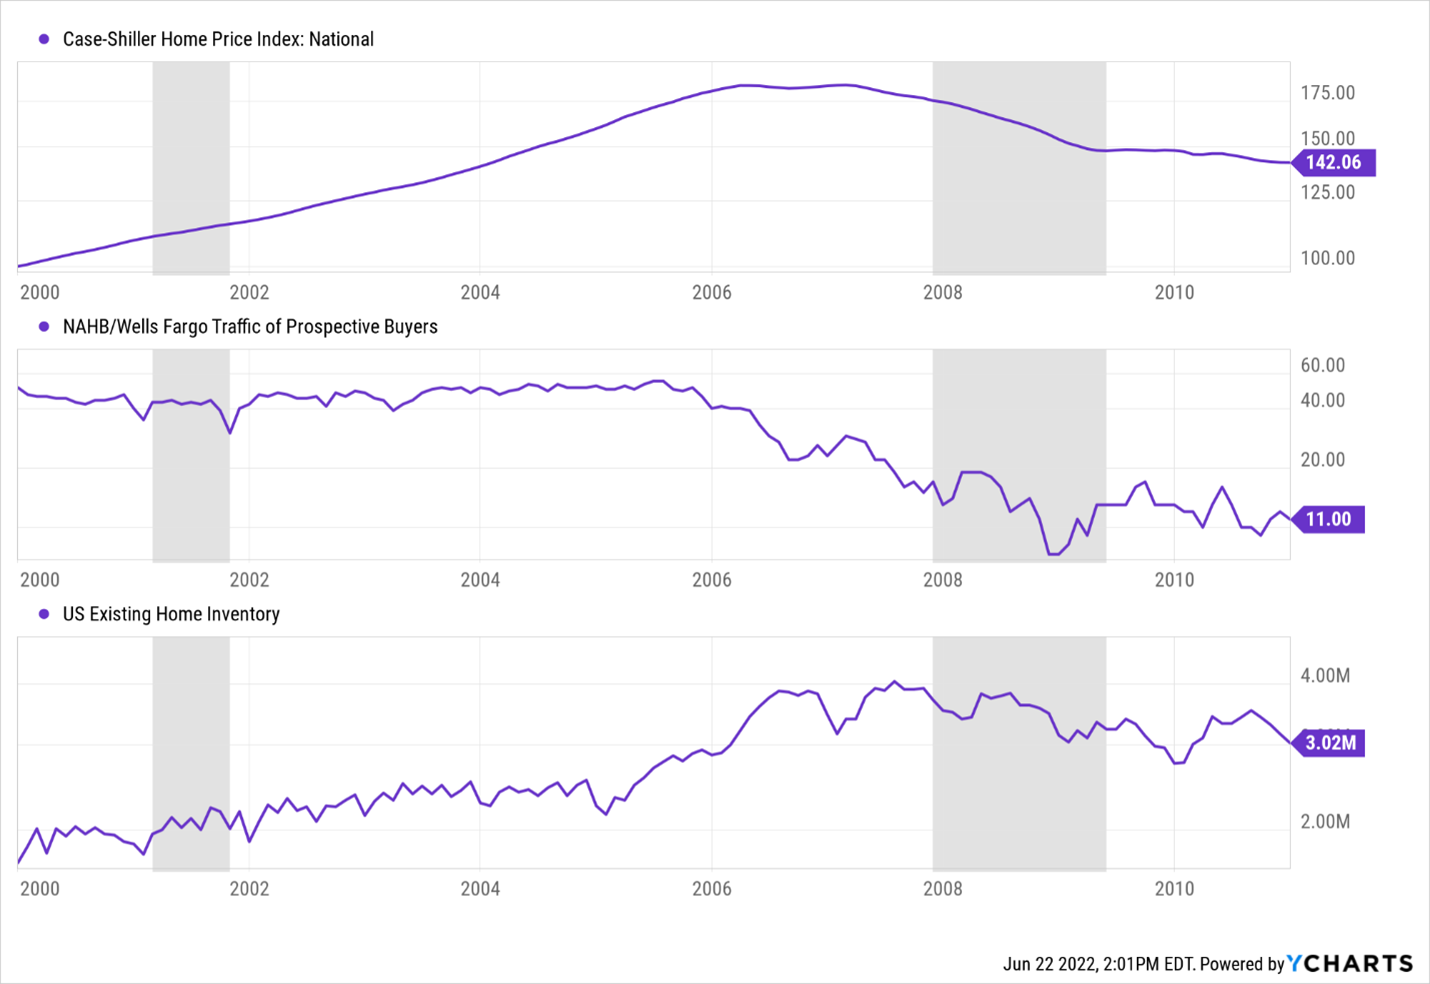 Graphs depicting the change in the Case-Shiller index/NAHB/home inventory in 2008